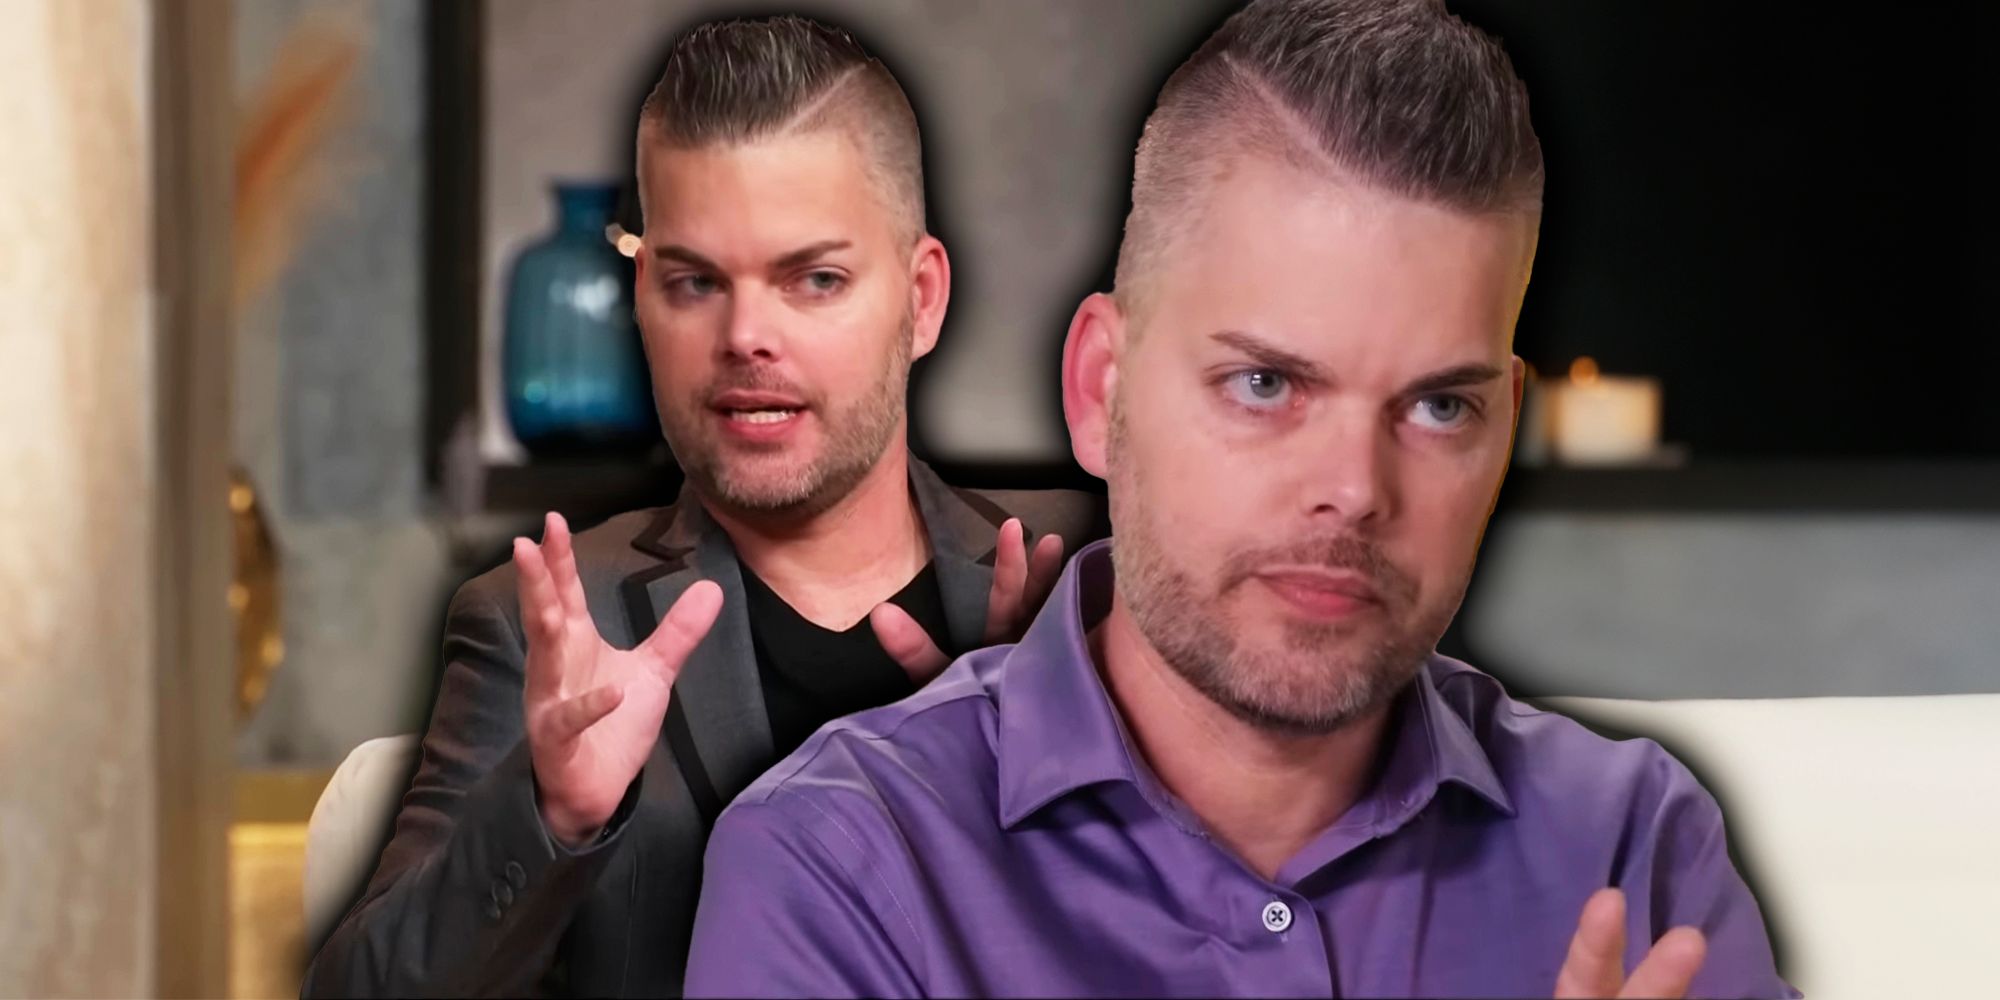 Tim Malcolm 90 Day Fiance montage tim in purple shirt and darker outfit